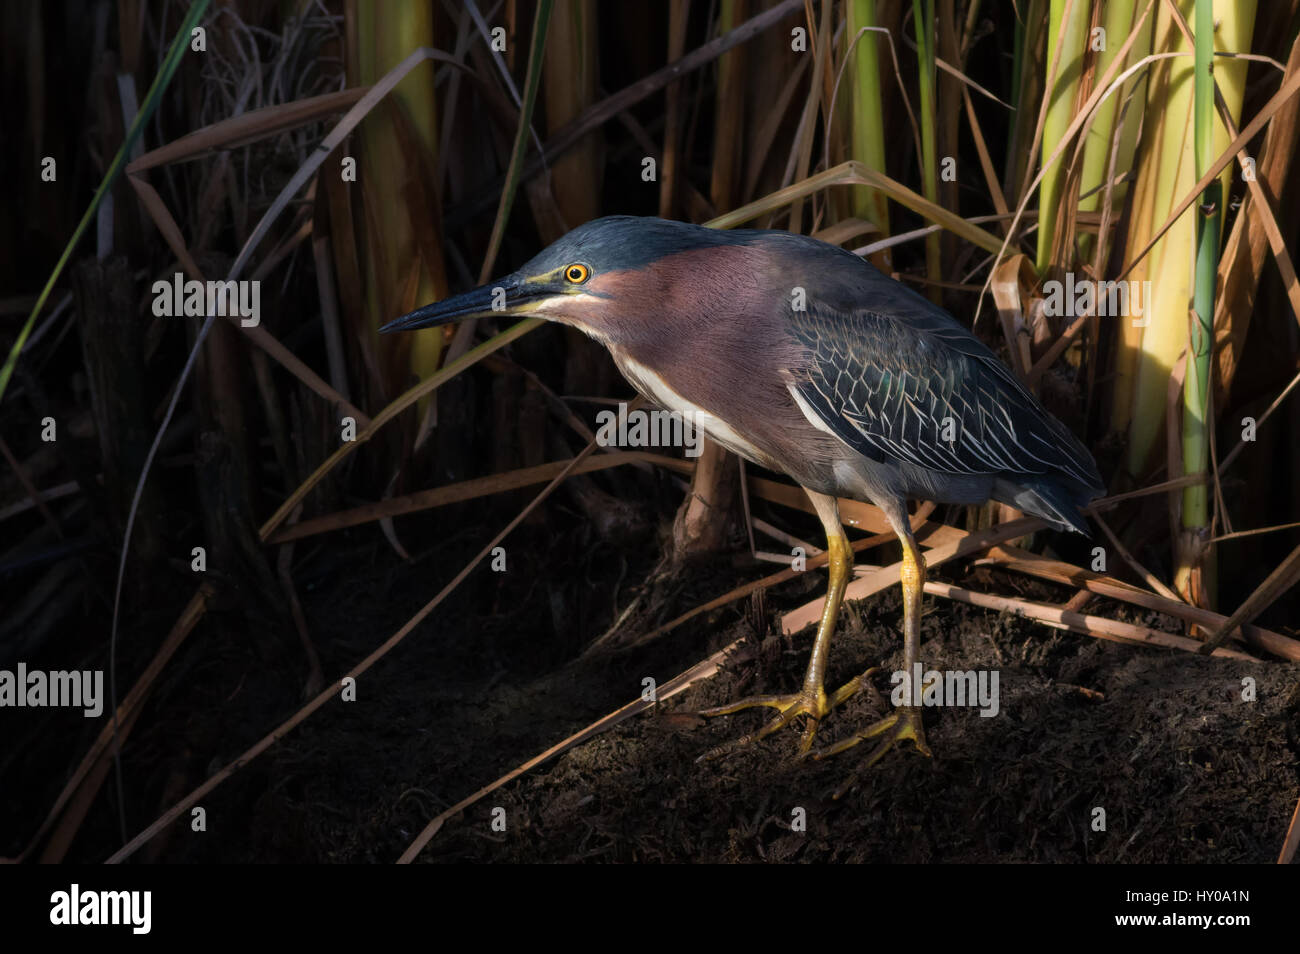 A ray of early morning light hits a green heron hidden in the reeds. These colorful tiny herons are often hard to photograph as they hide in the reeds. Stock Photo